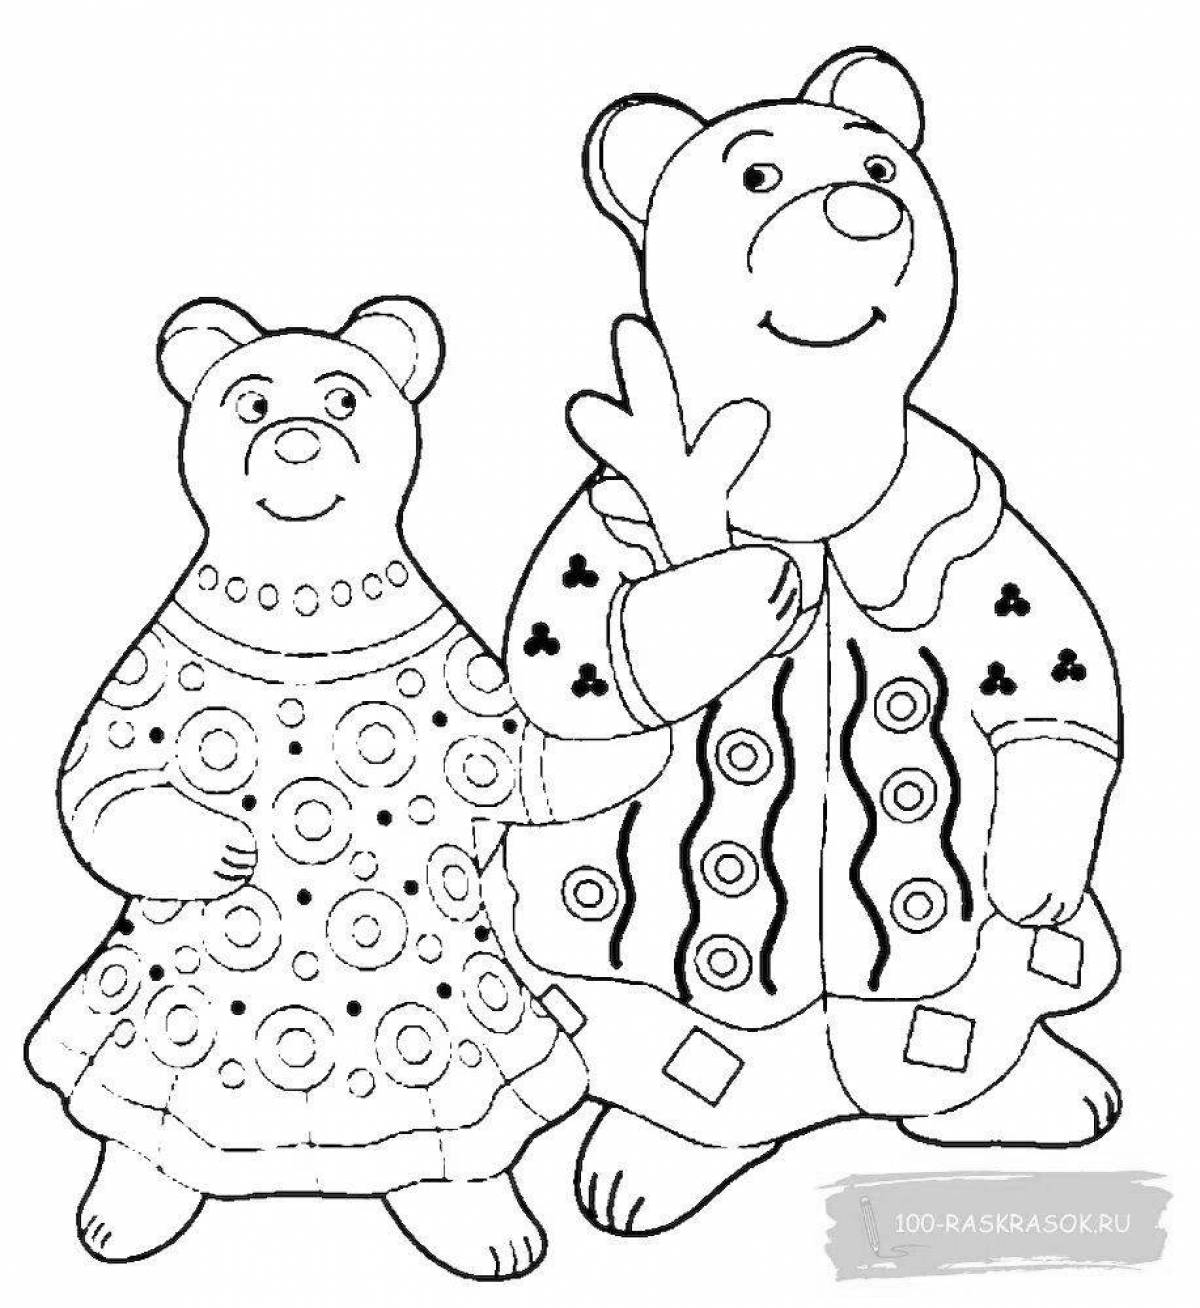 Inspirational craft coloring pages for kids